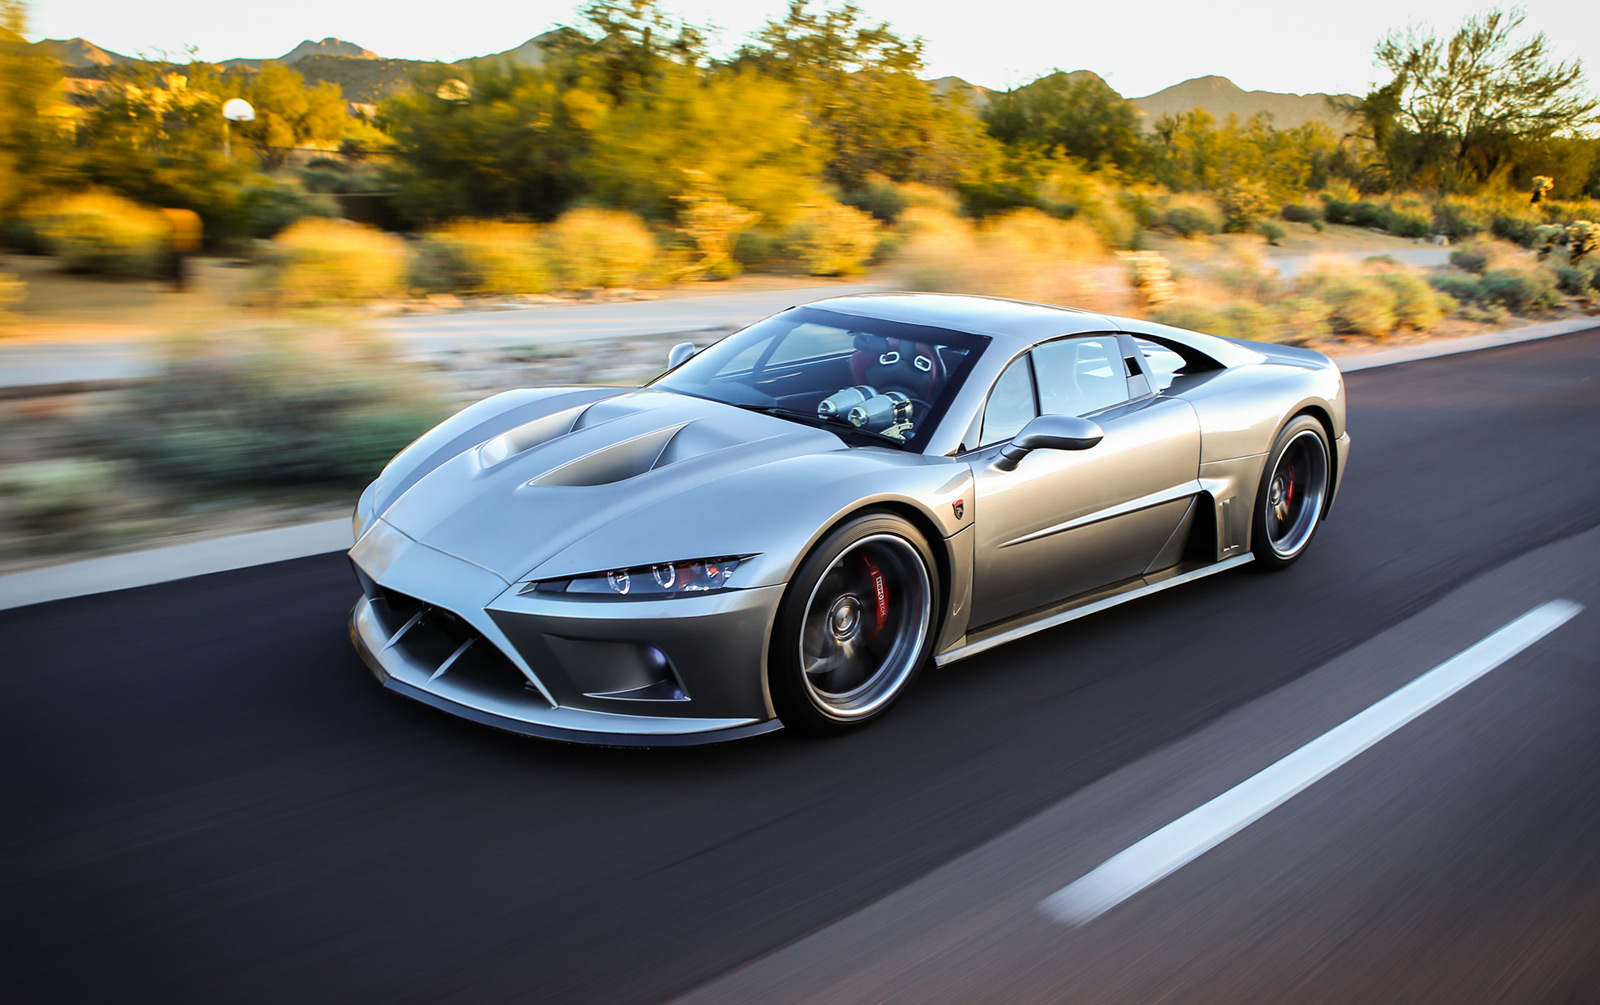 the-falcon-f7-0-60-in-2-7-seconds-1100hp-and-a-top-speed-of-over-200mph